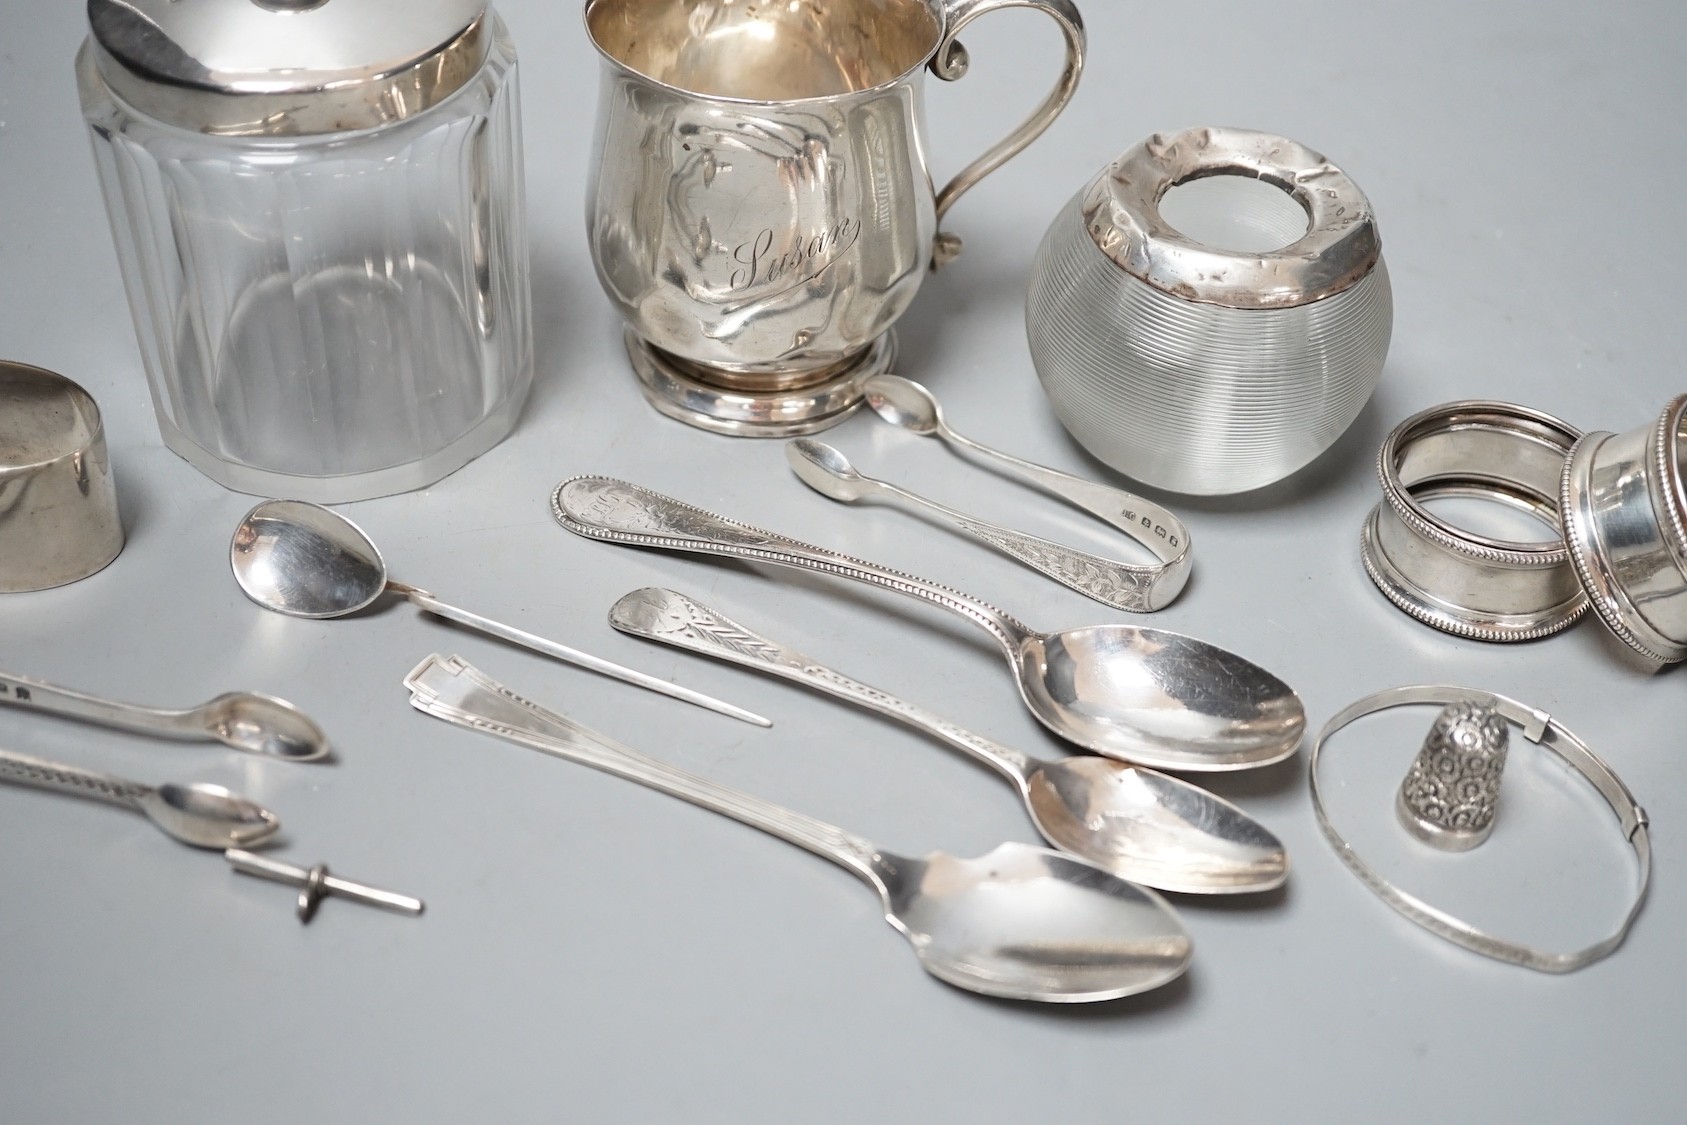 Sundry small silver including a mounted glass match tidy(a.f.), a silver christening mug(a.f.), mounted glass preserve jar, three napkin rings, six items of flatware, thimble T-bar and a sterling bangle.